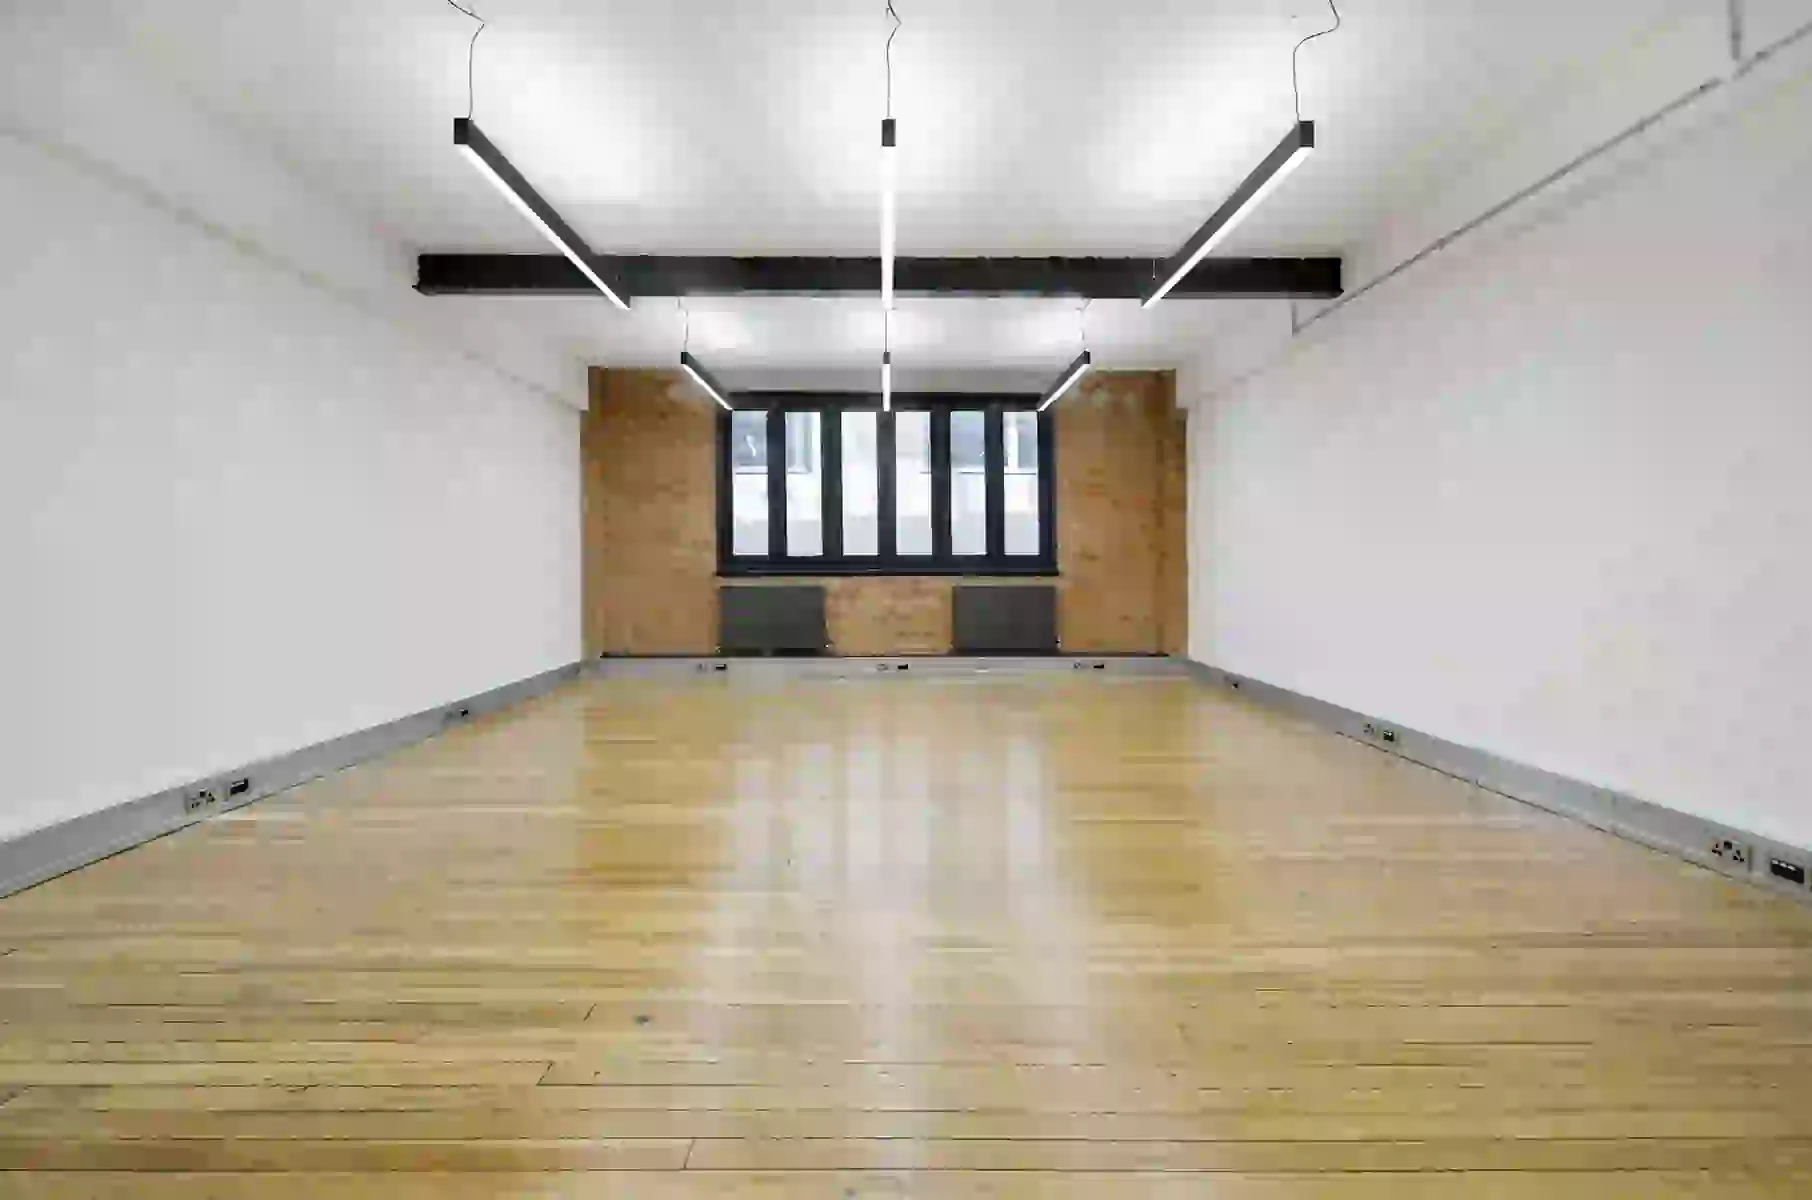 Office space to rent at Canalot Studios, 222 Kensal Road, Westbourne Park, London, unit CN.209, 550 sq ft (51 sq m).